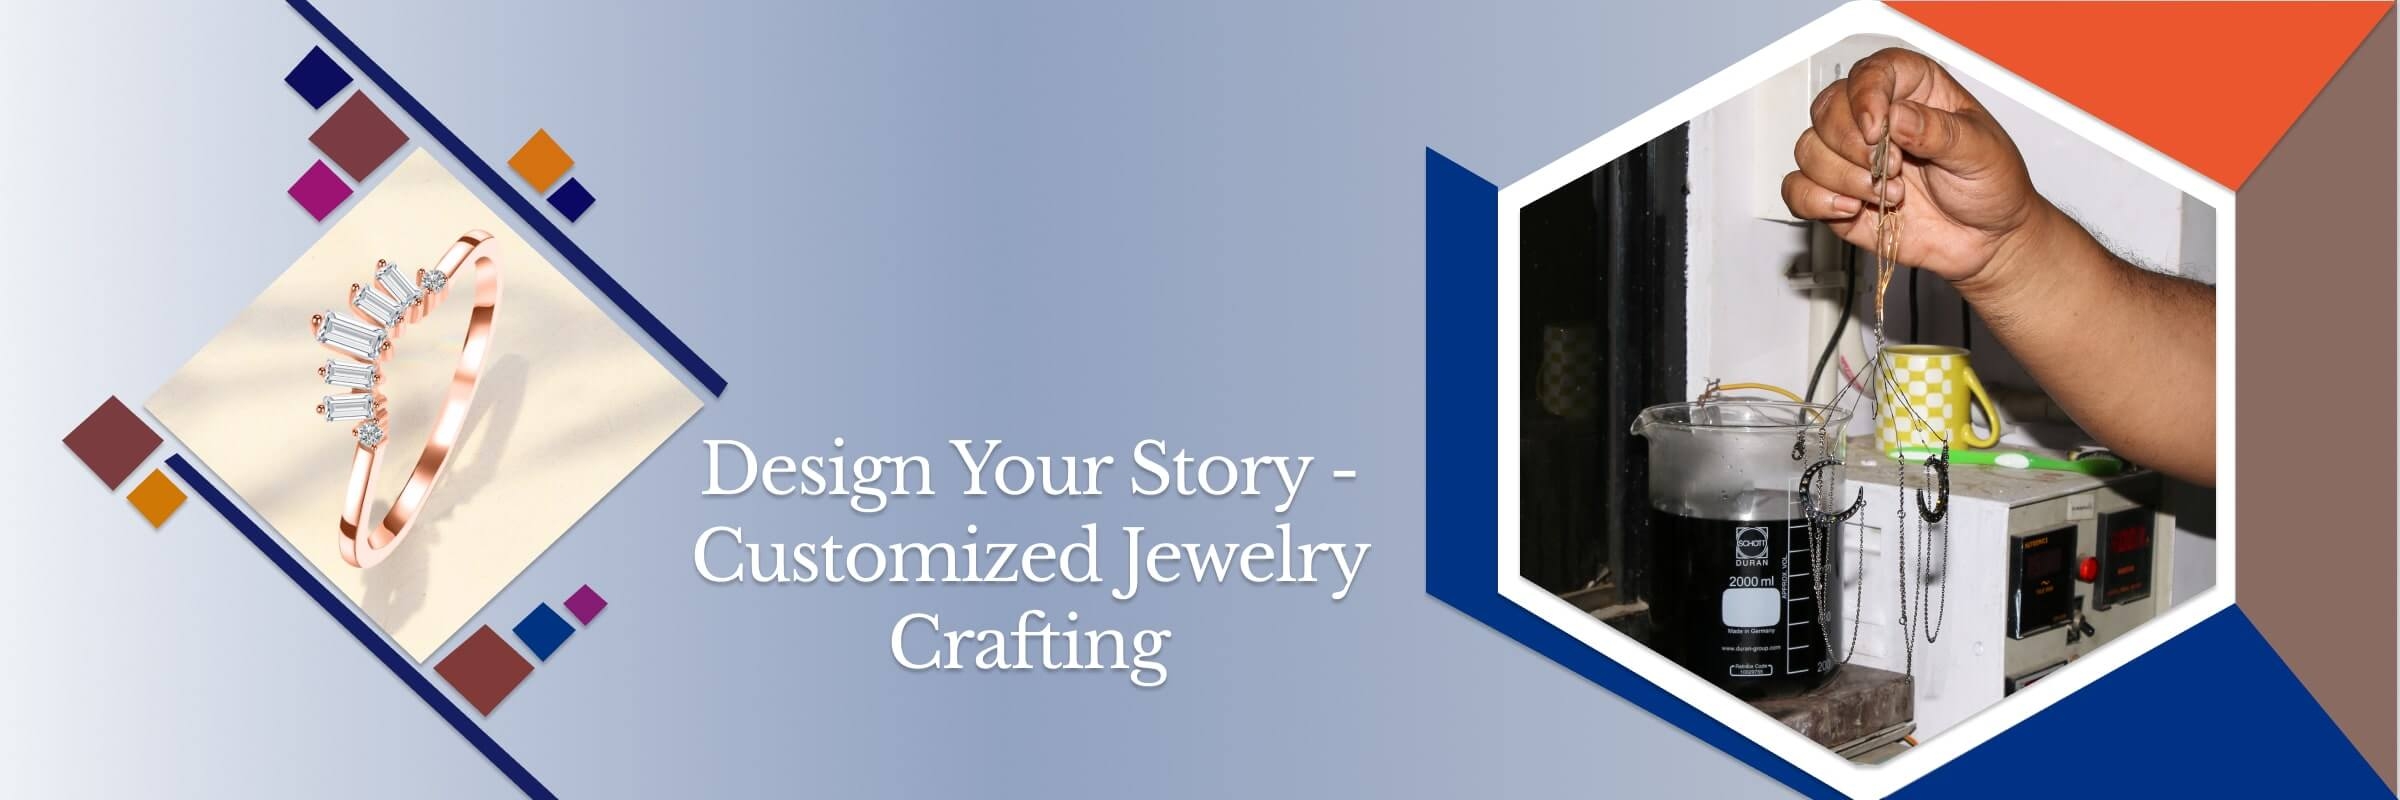 How to Customize Jewelry With The Design of Your Choice?